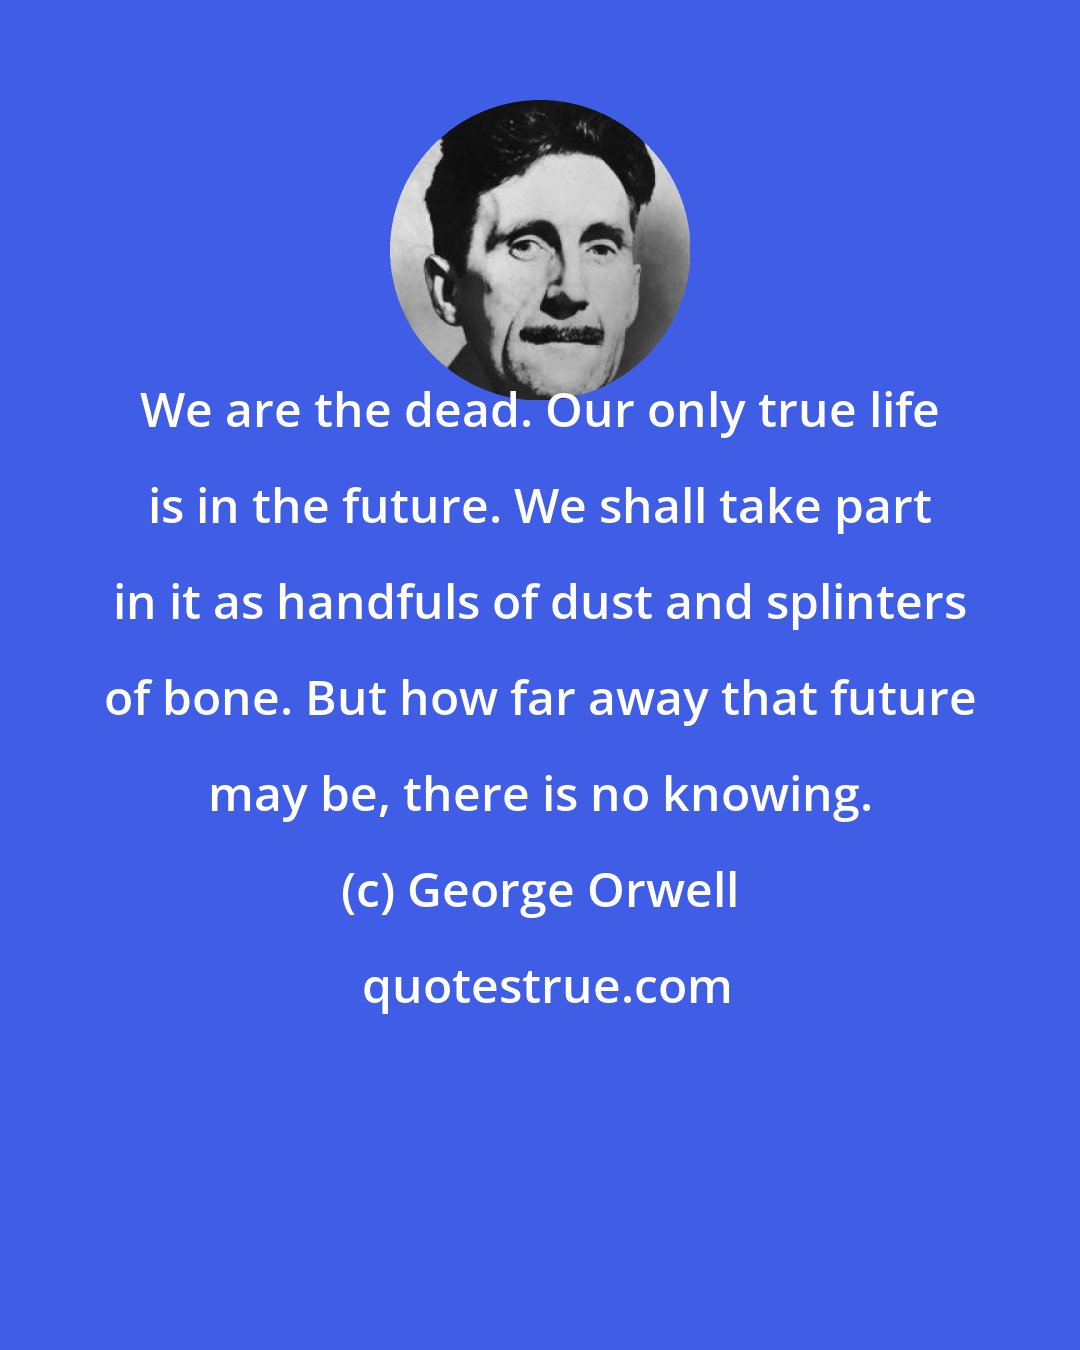 George Orwell: We are the dead. Our only true life is in the future. We shall take part in it as handfuls of dust and splinters of bone. But how far away that future may be, there is no knowing.